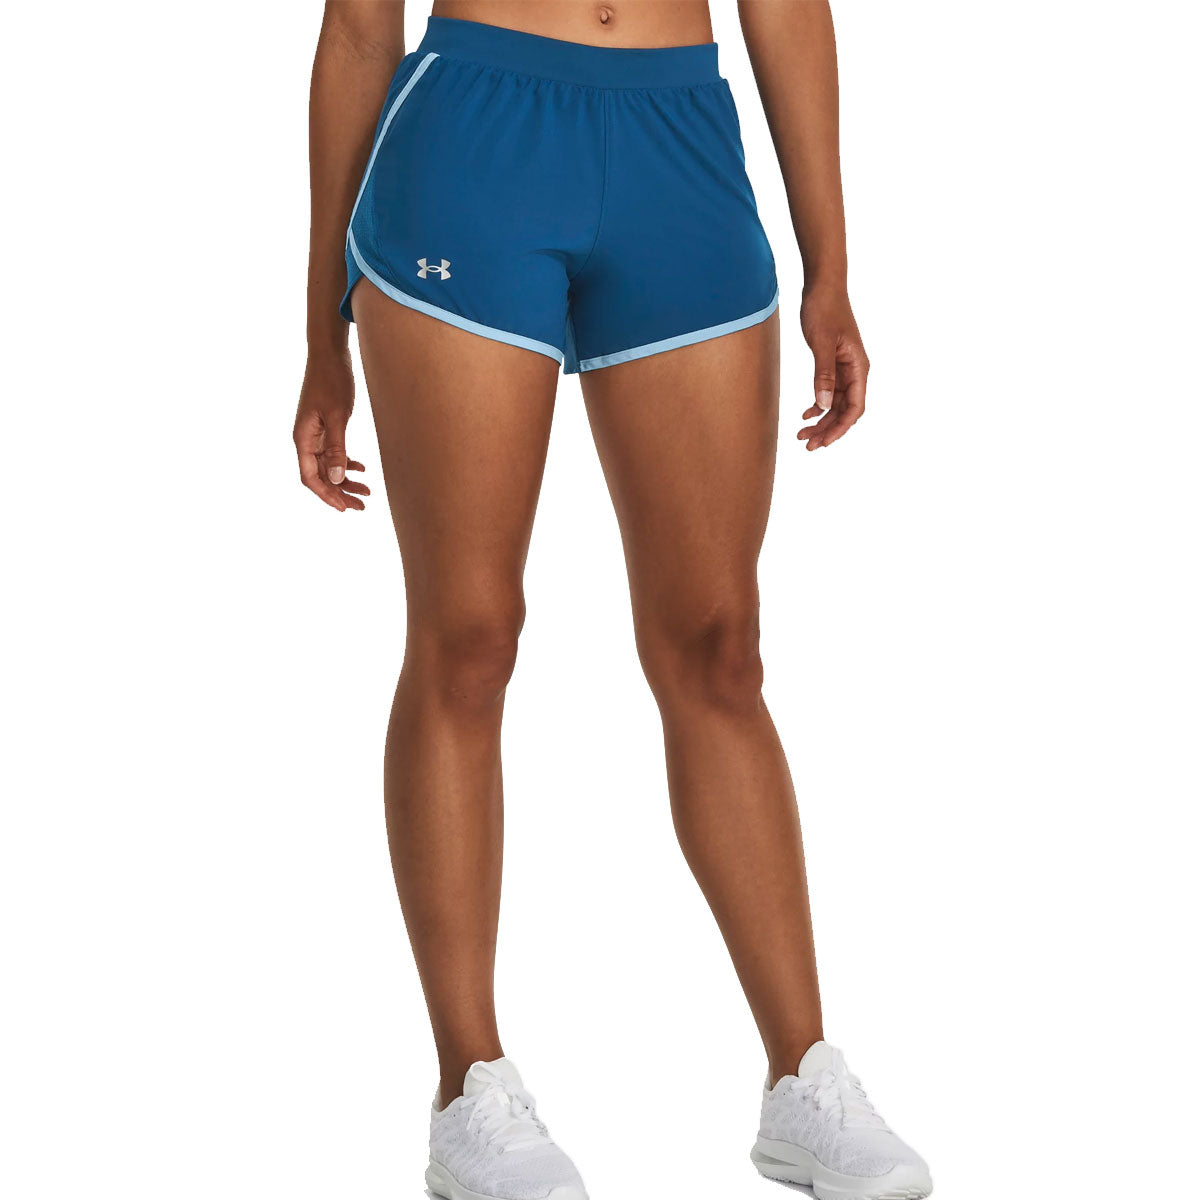 Under Armour Fly By 2.0 Training Shorts - Womens - Varsity Blue/Blizzard/Reflective